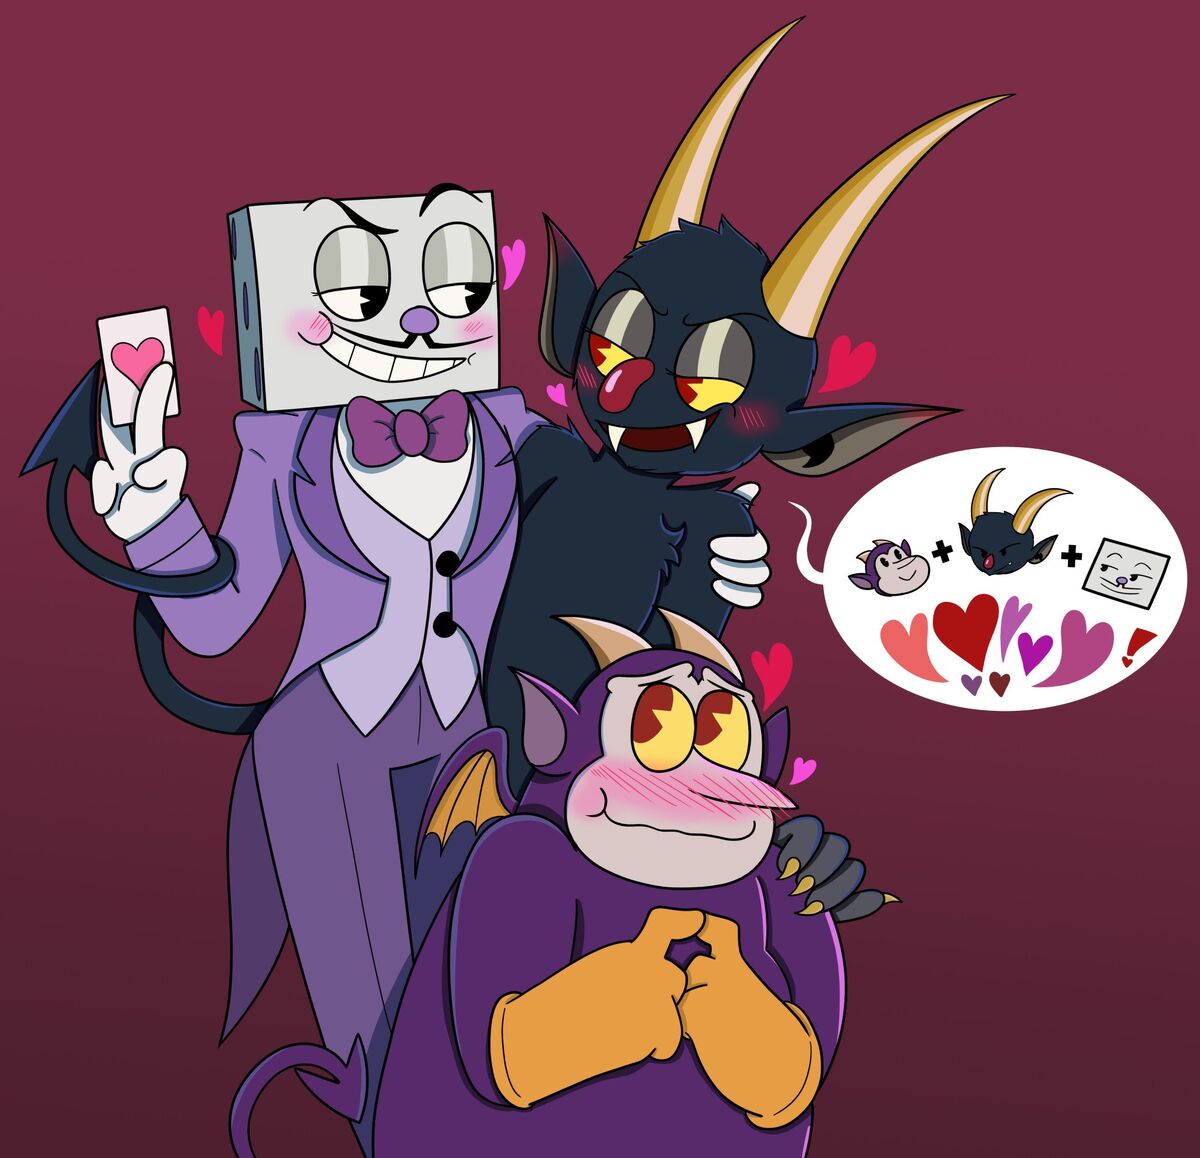 sws37sisters on X: King dice and the devil I love them both 😍😘 #Cuphead  #cupheadfanart #Cuphead #cuphead #kingdice #thedevil   / X